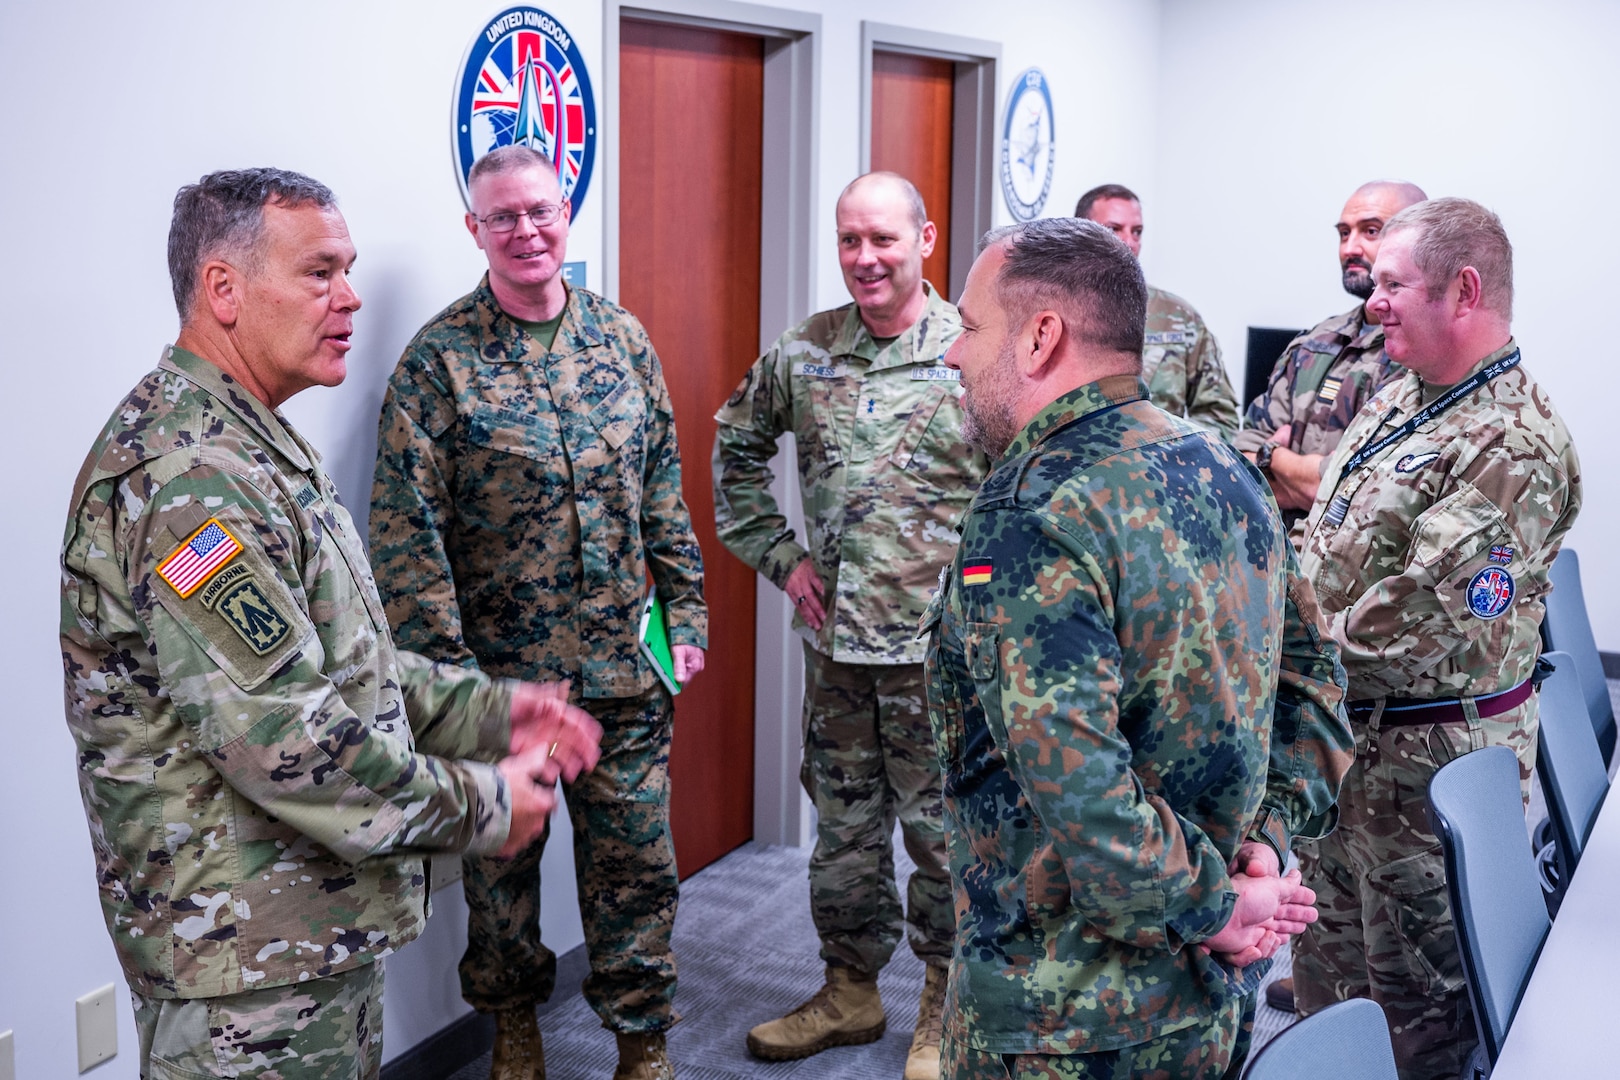 U.S. Army Gen. James Dickinson, United States Space Command (USSPACECOM) commander, left, and U.S. Marine Corps Master Gunnery Sgt. Scott Stalker, USSPACECOM command senior enlisted leader, second from left, speak with liaison officers from multiple nations while visiting the Combined Force Space Component Command (CFSCC) at Vandenberg Space Force Base, Calif., Jan. 4, 2023. CFSCC plans, tasks, directs, monitors, and assess the execution of combined and joint space operations for theater effects on behalf of the USSPACECOM command to directly integrate with ongoing operations in other Combatant Commands. USSPACECOM conducts operations in, from, and to space to deter conflict, and if necessary, defeat aggression, deliver space combat power for the Joint and Combined force, and defend U.S. vital interests with allies and partners. (U.S. Space Force photo by Tech. Sgt. Luke Kitterman)